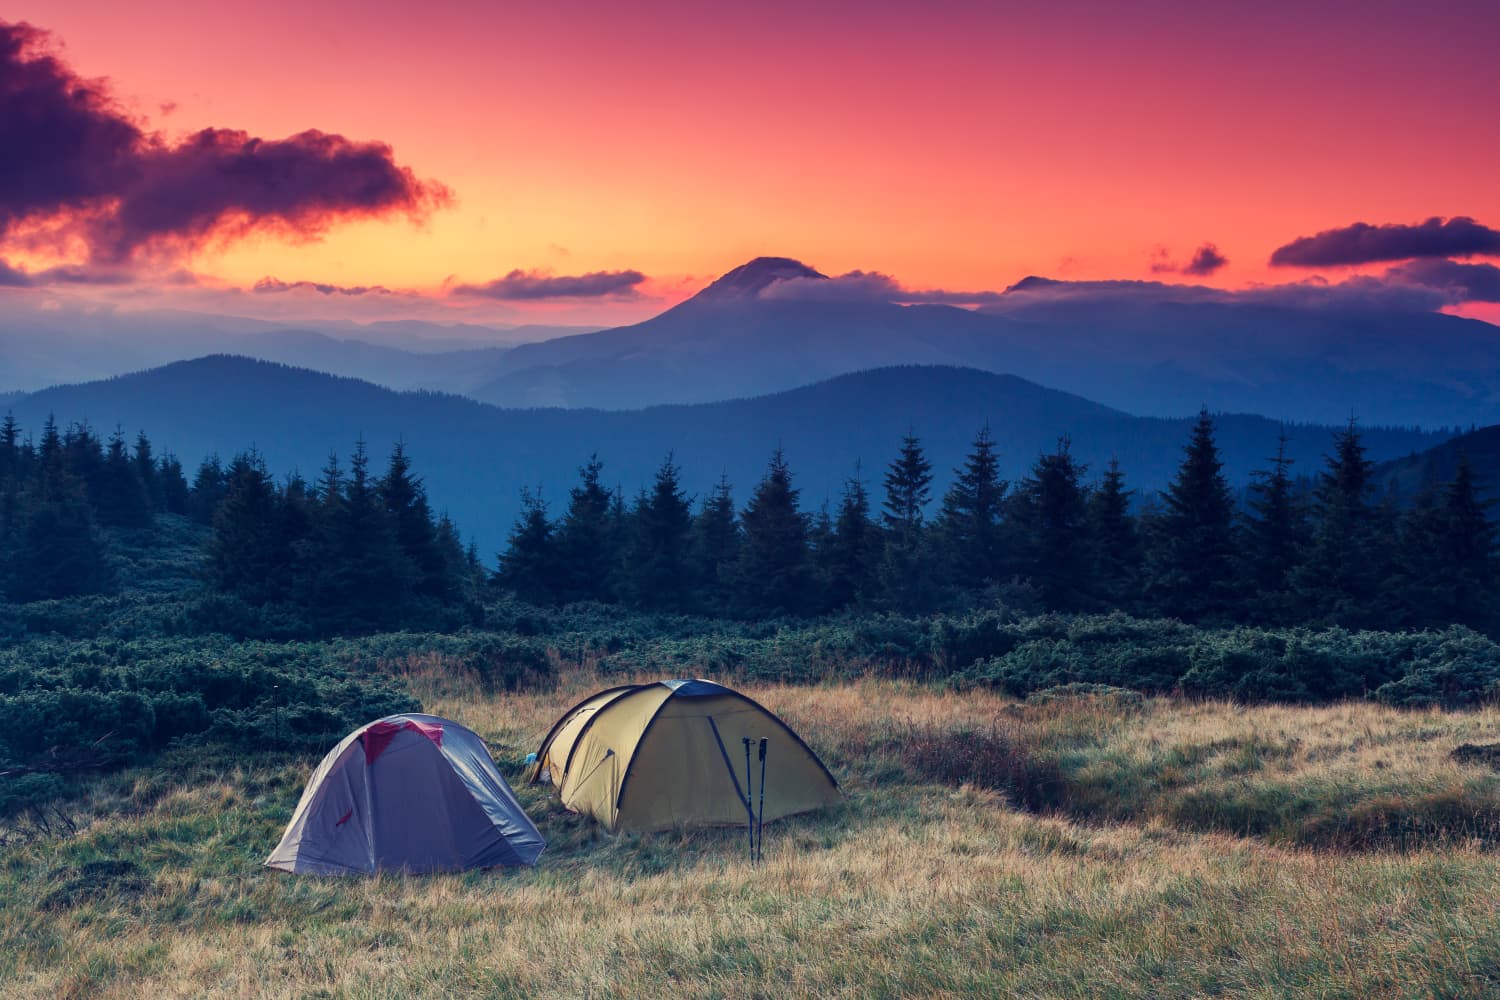 at%2Fnews culture%2F2022 7%2Fshutterstock sunset camping